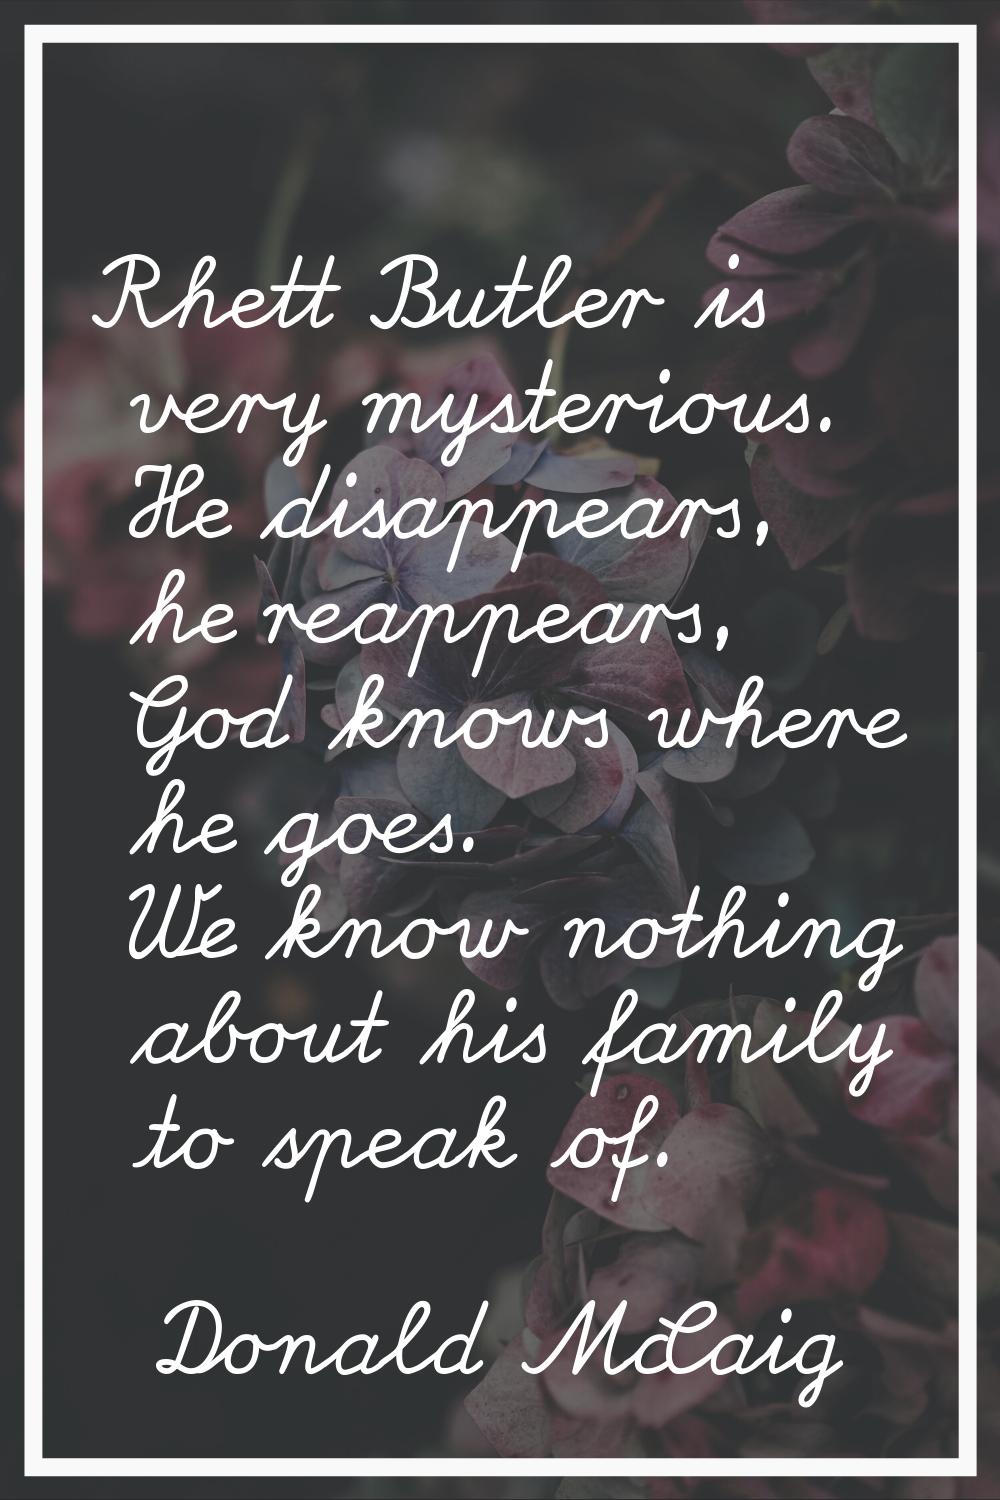 Rhett Butler is very mysterious. He disappears, he reappears, God knows where he goes. We know noth